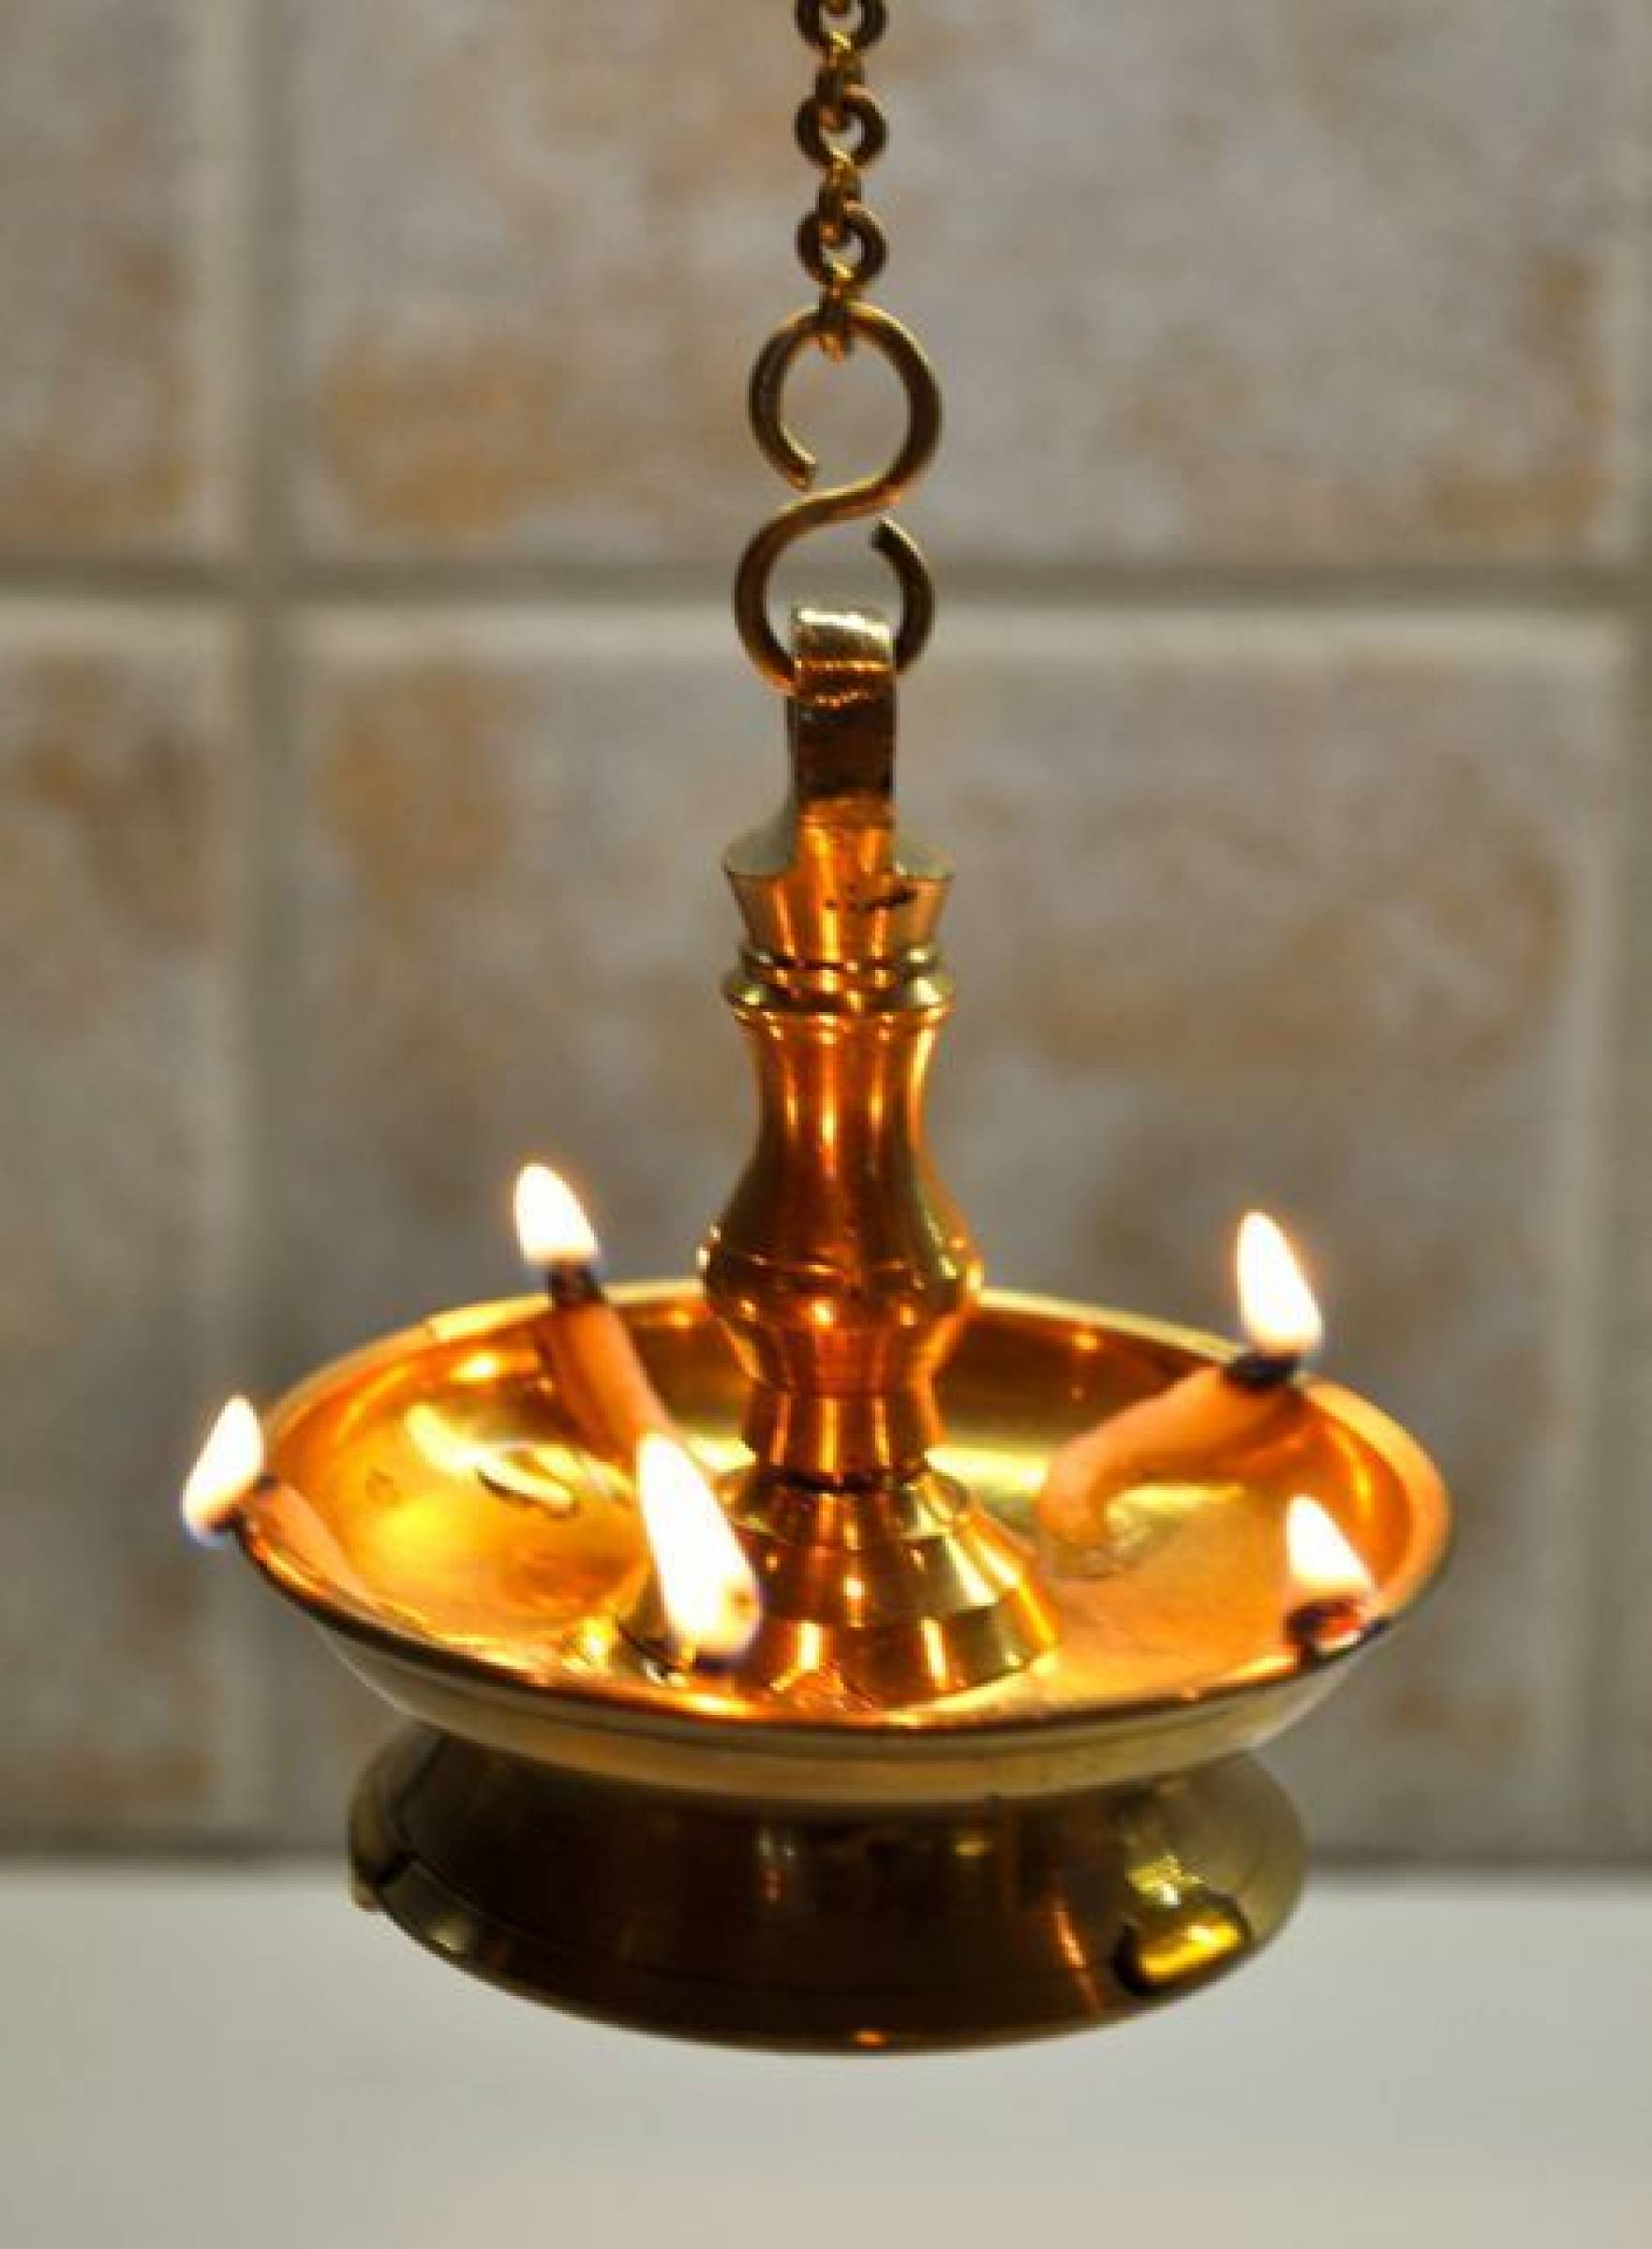 Oil lamp/light is important, Copper light is greater